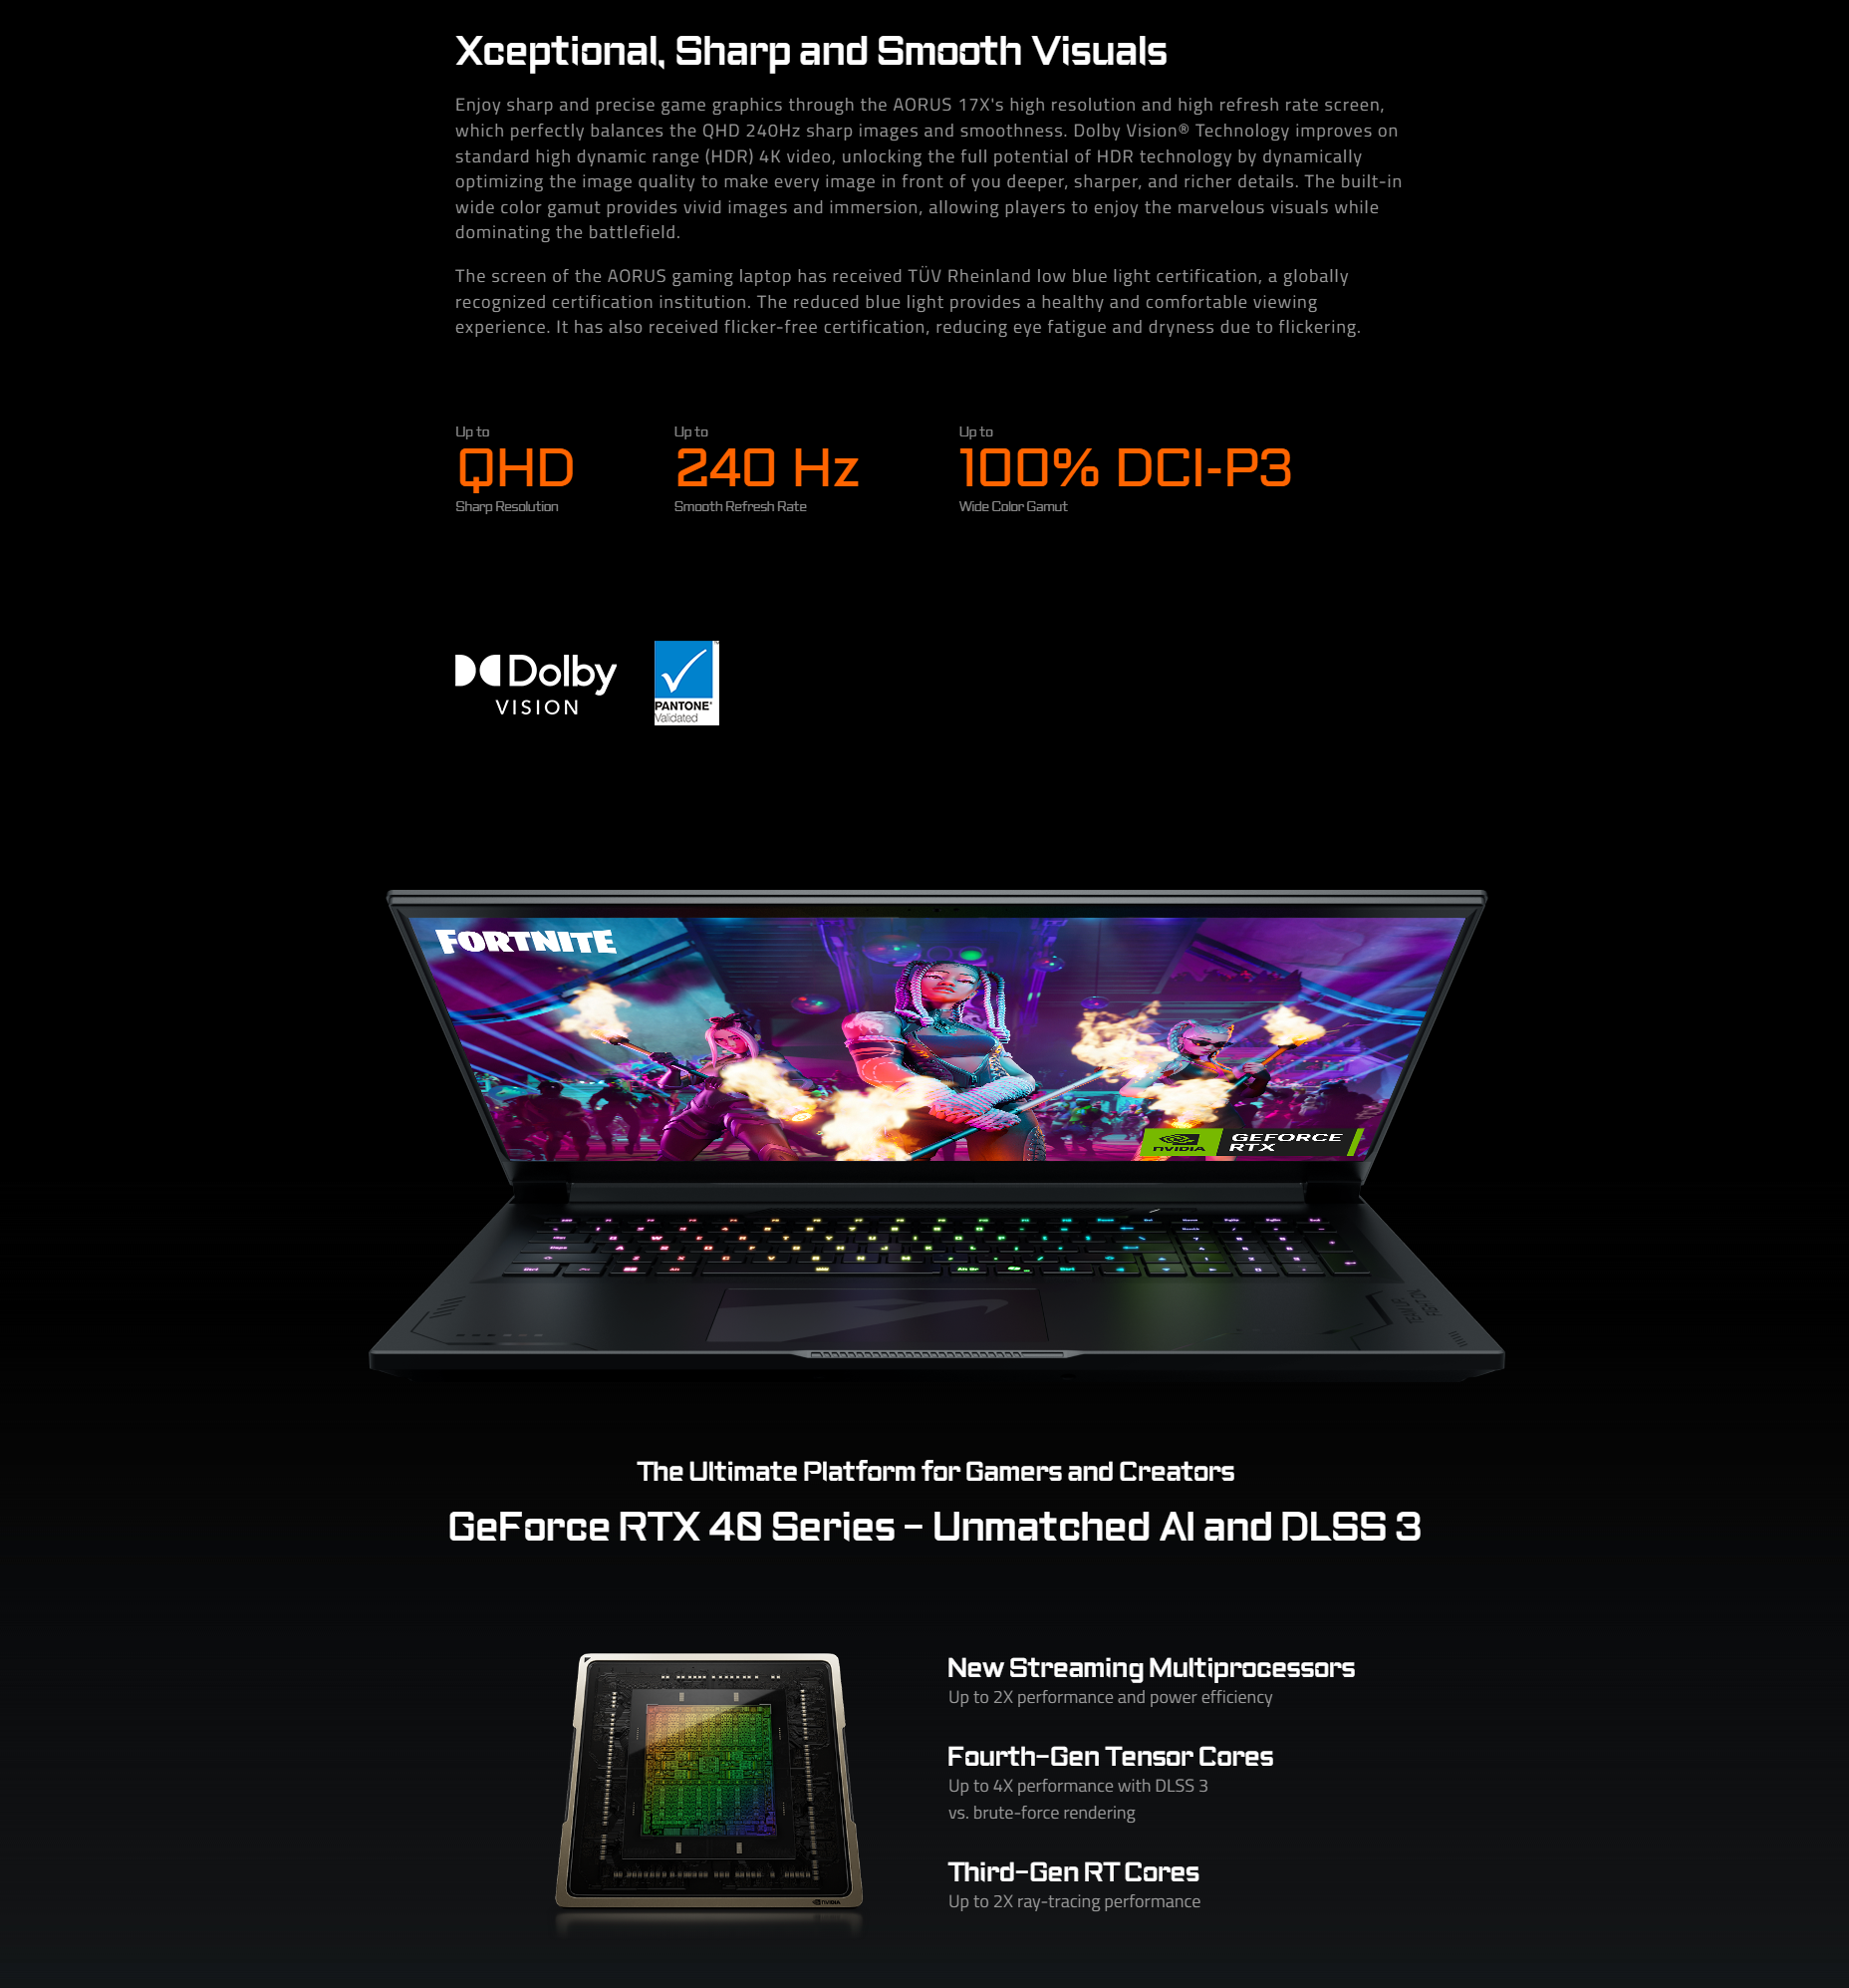 A large marketing image providing additional information about the product Gigabyte AOURUS 17X AZG-65AU665SH 17.3" 240Hz 14th Gen i9 14900HX RTX 4090 Win 11 Gaming Notebook - Additional alt info not provided